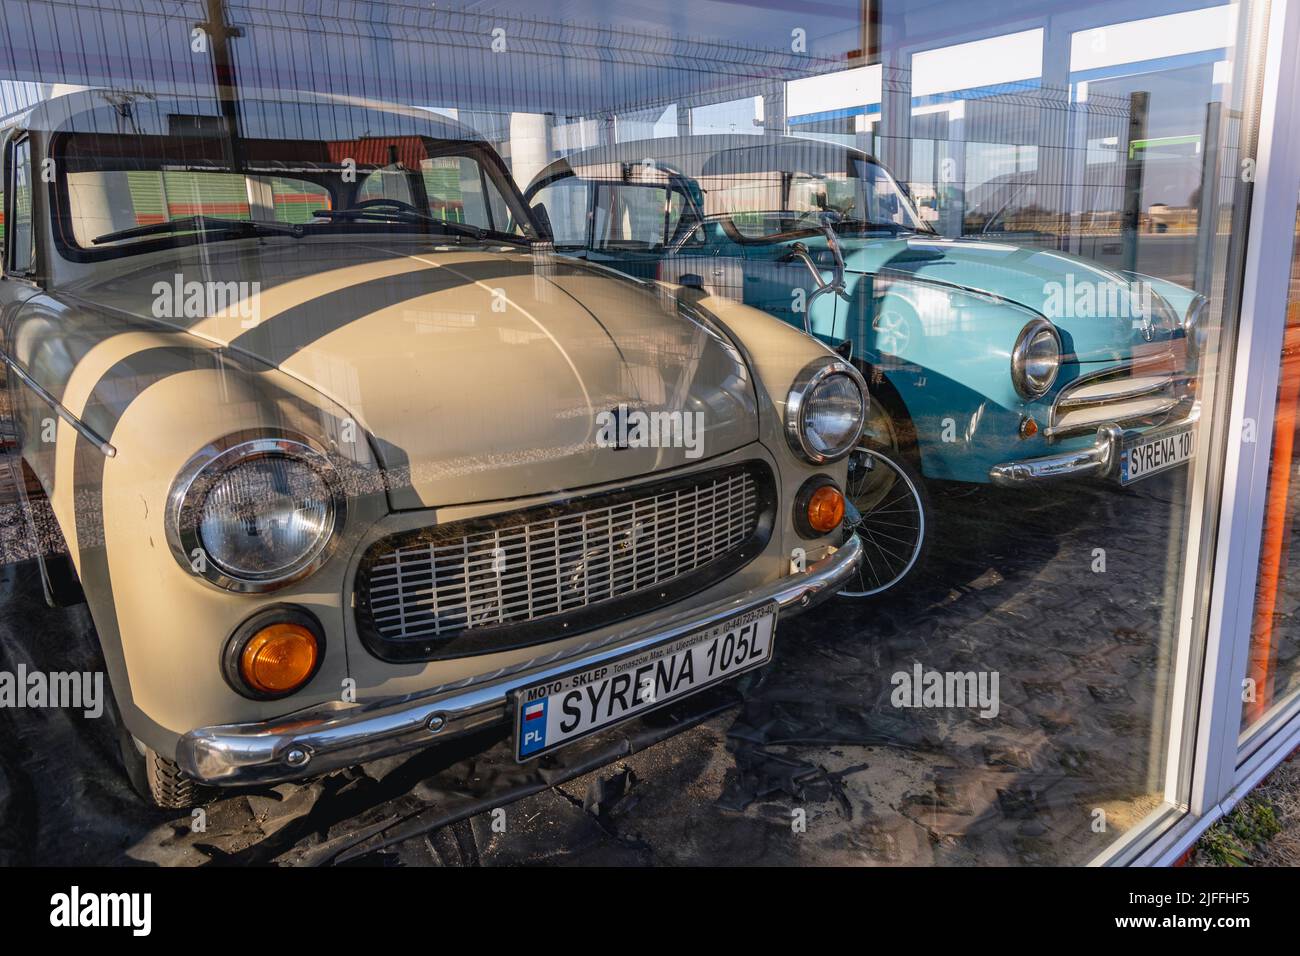 Syrena 105L and 100 cars on a permanent exhibition of classic car on a Moya gas station on a S8 expressway near Rawa Mazowiecka, Poland Stock Photo